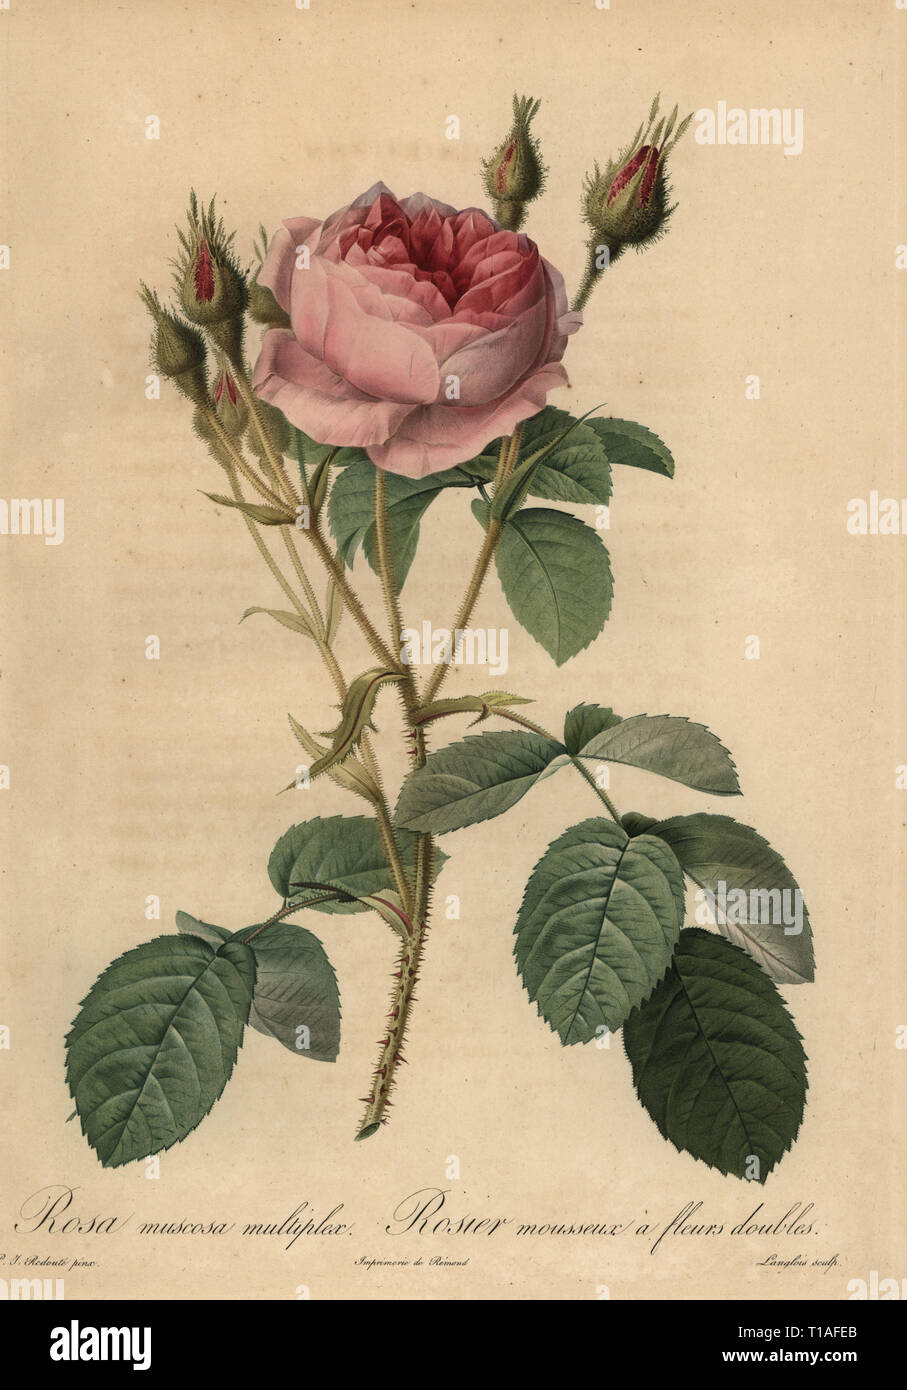 Pink moss rose, Rosa centifolia f. muscosa (Rosa muscosa multiplex, Rosier mousseux a fleurs doubles). Stipple copperplate engraving by Pierre Gabriel Langlois handcoloured a la poupee after a botanical illustration by Pierre-Joseph Redoute from the first folio edition of Les Roses, Firmin Didot, Paris, 1817. Stock Photo